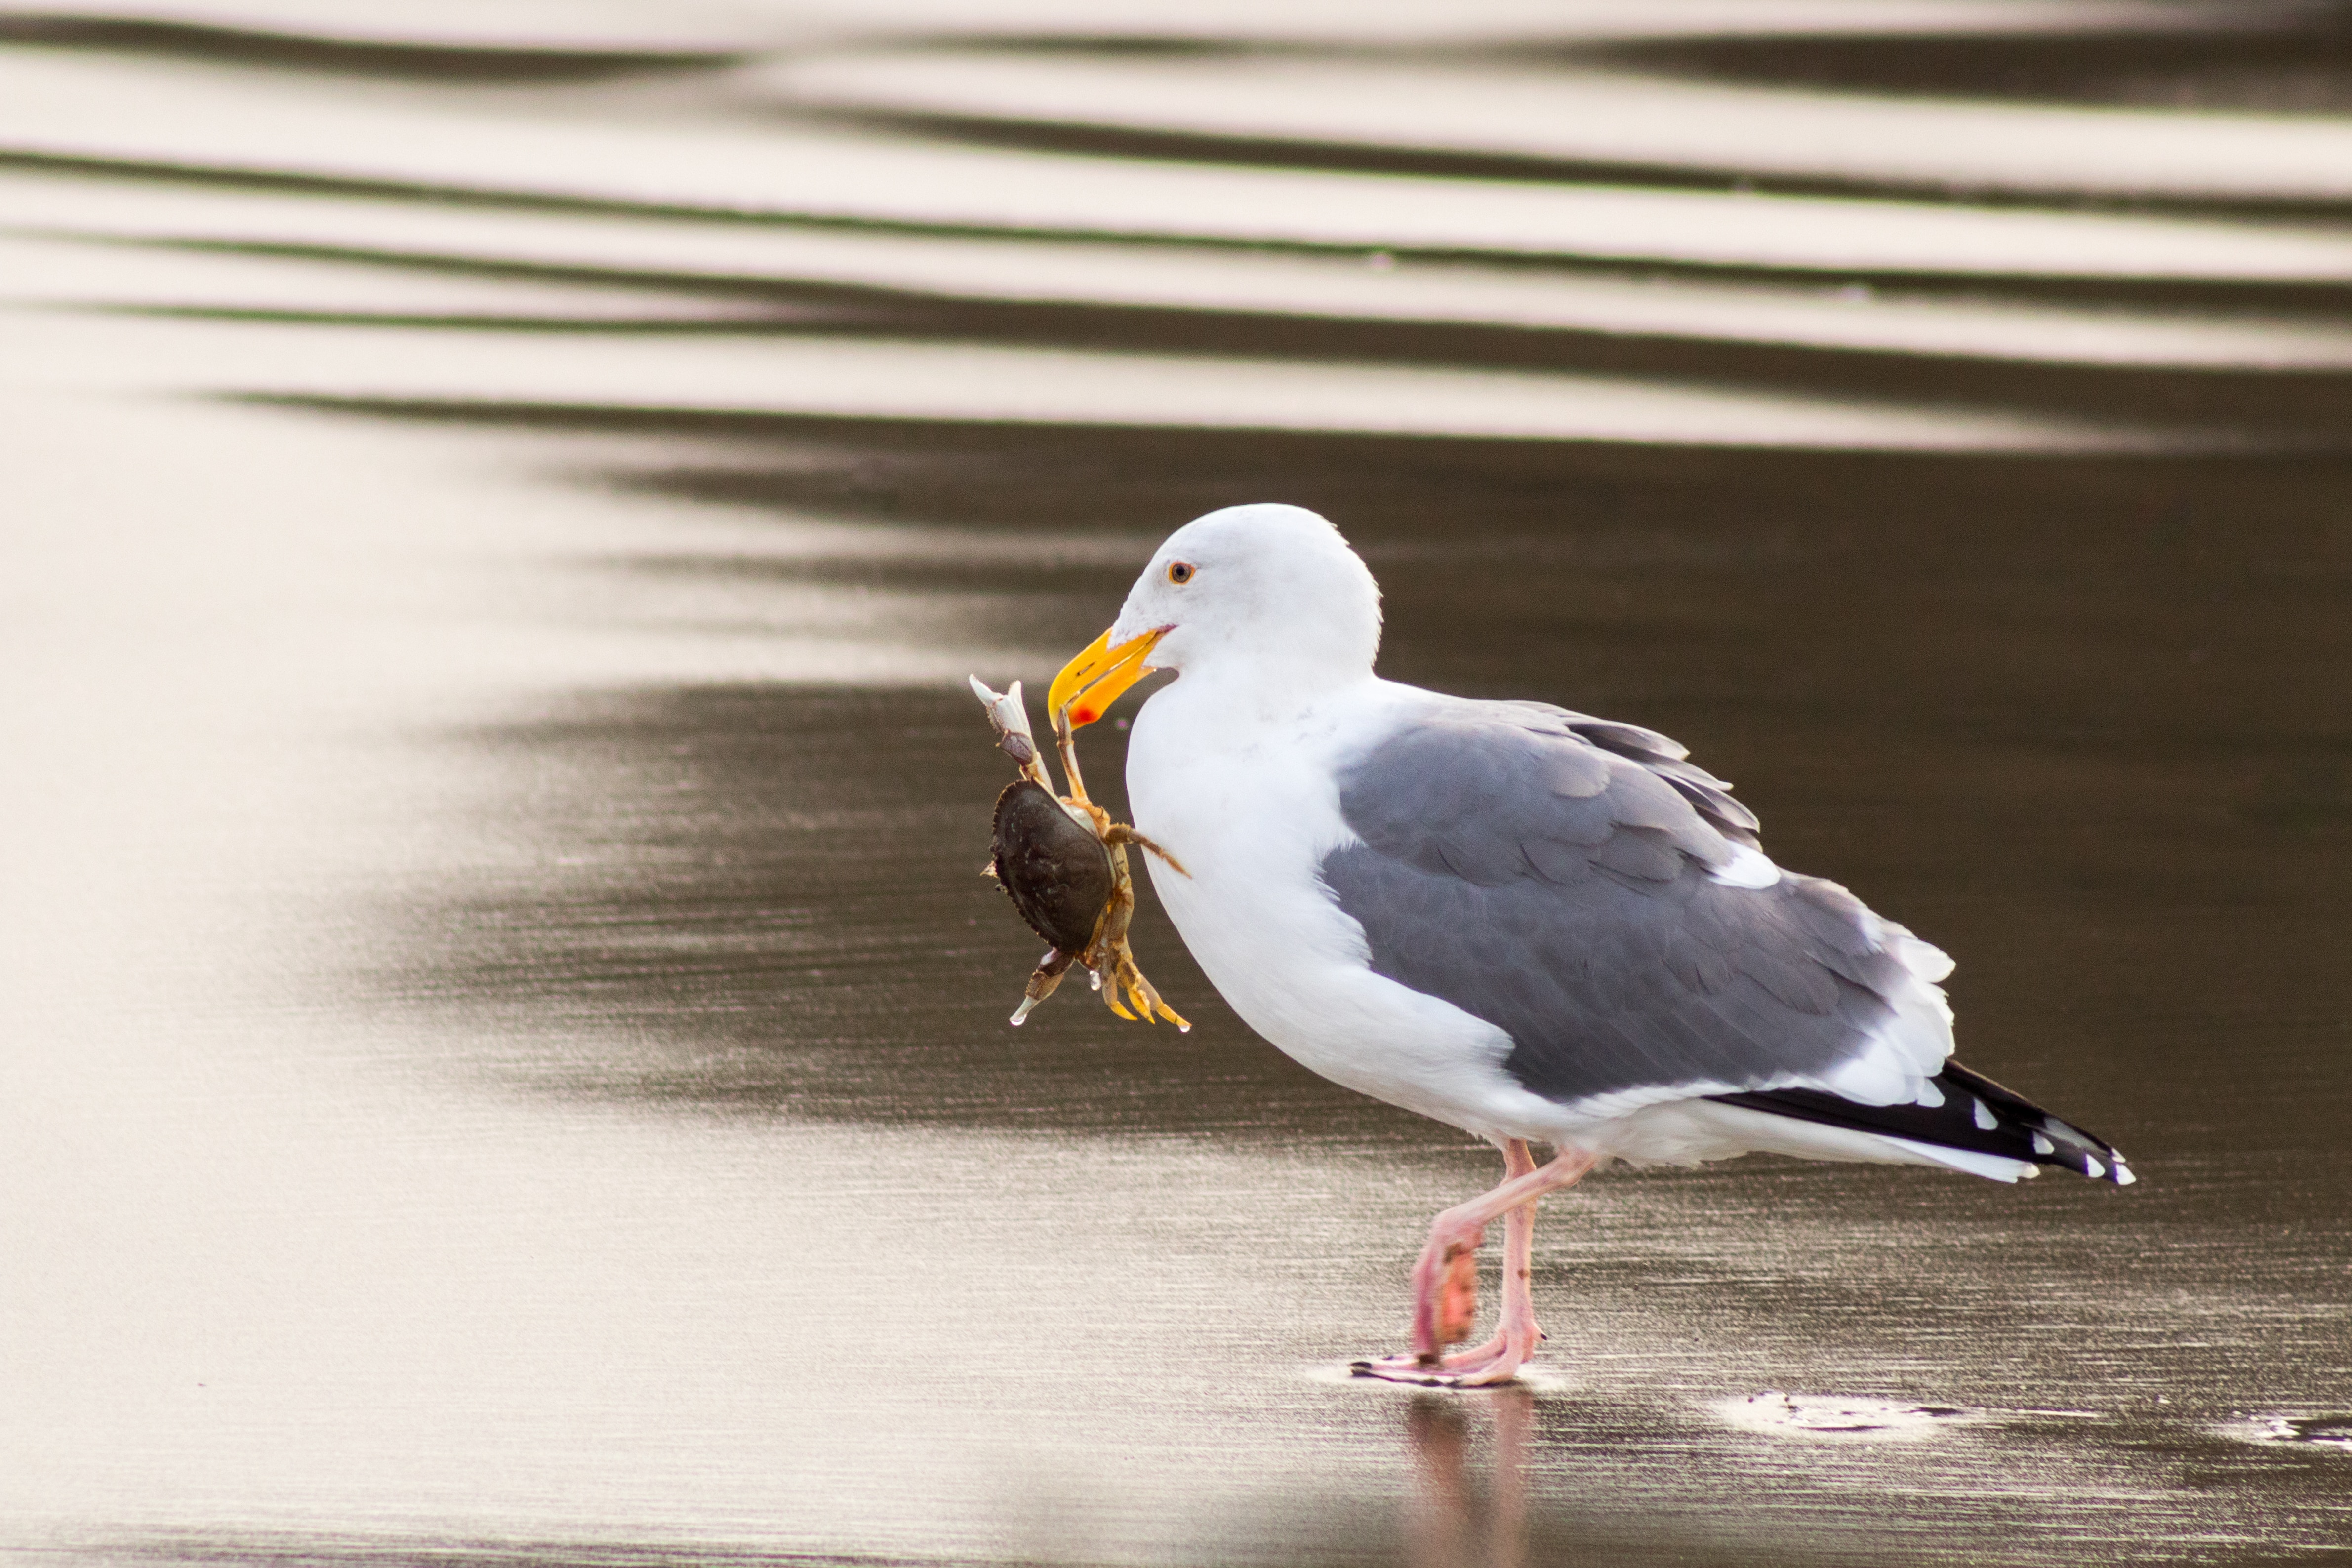 white and grey seagull biting brown crab on shore